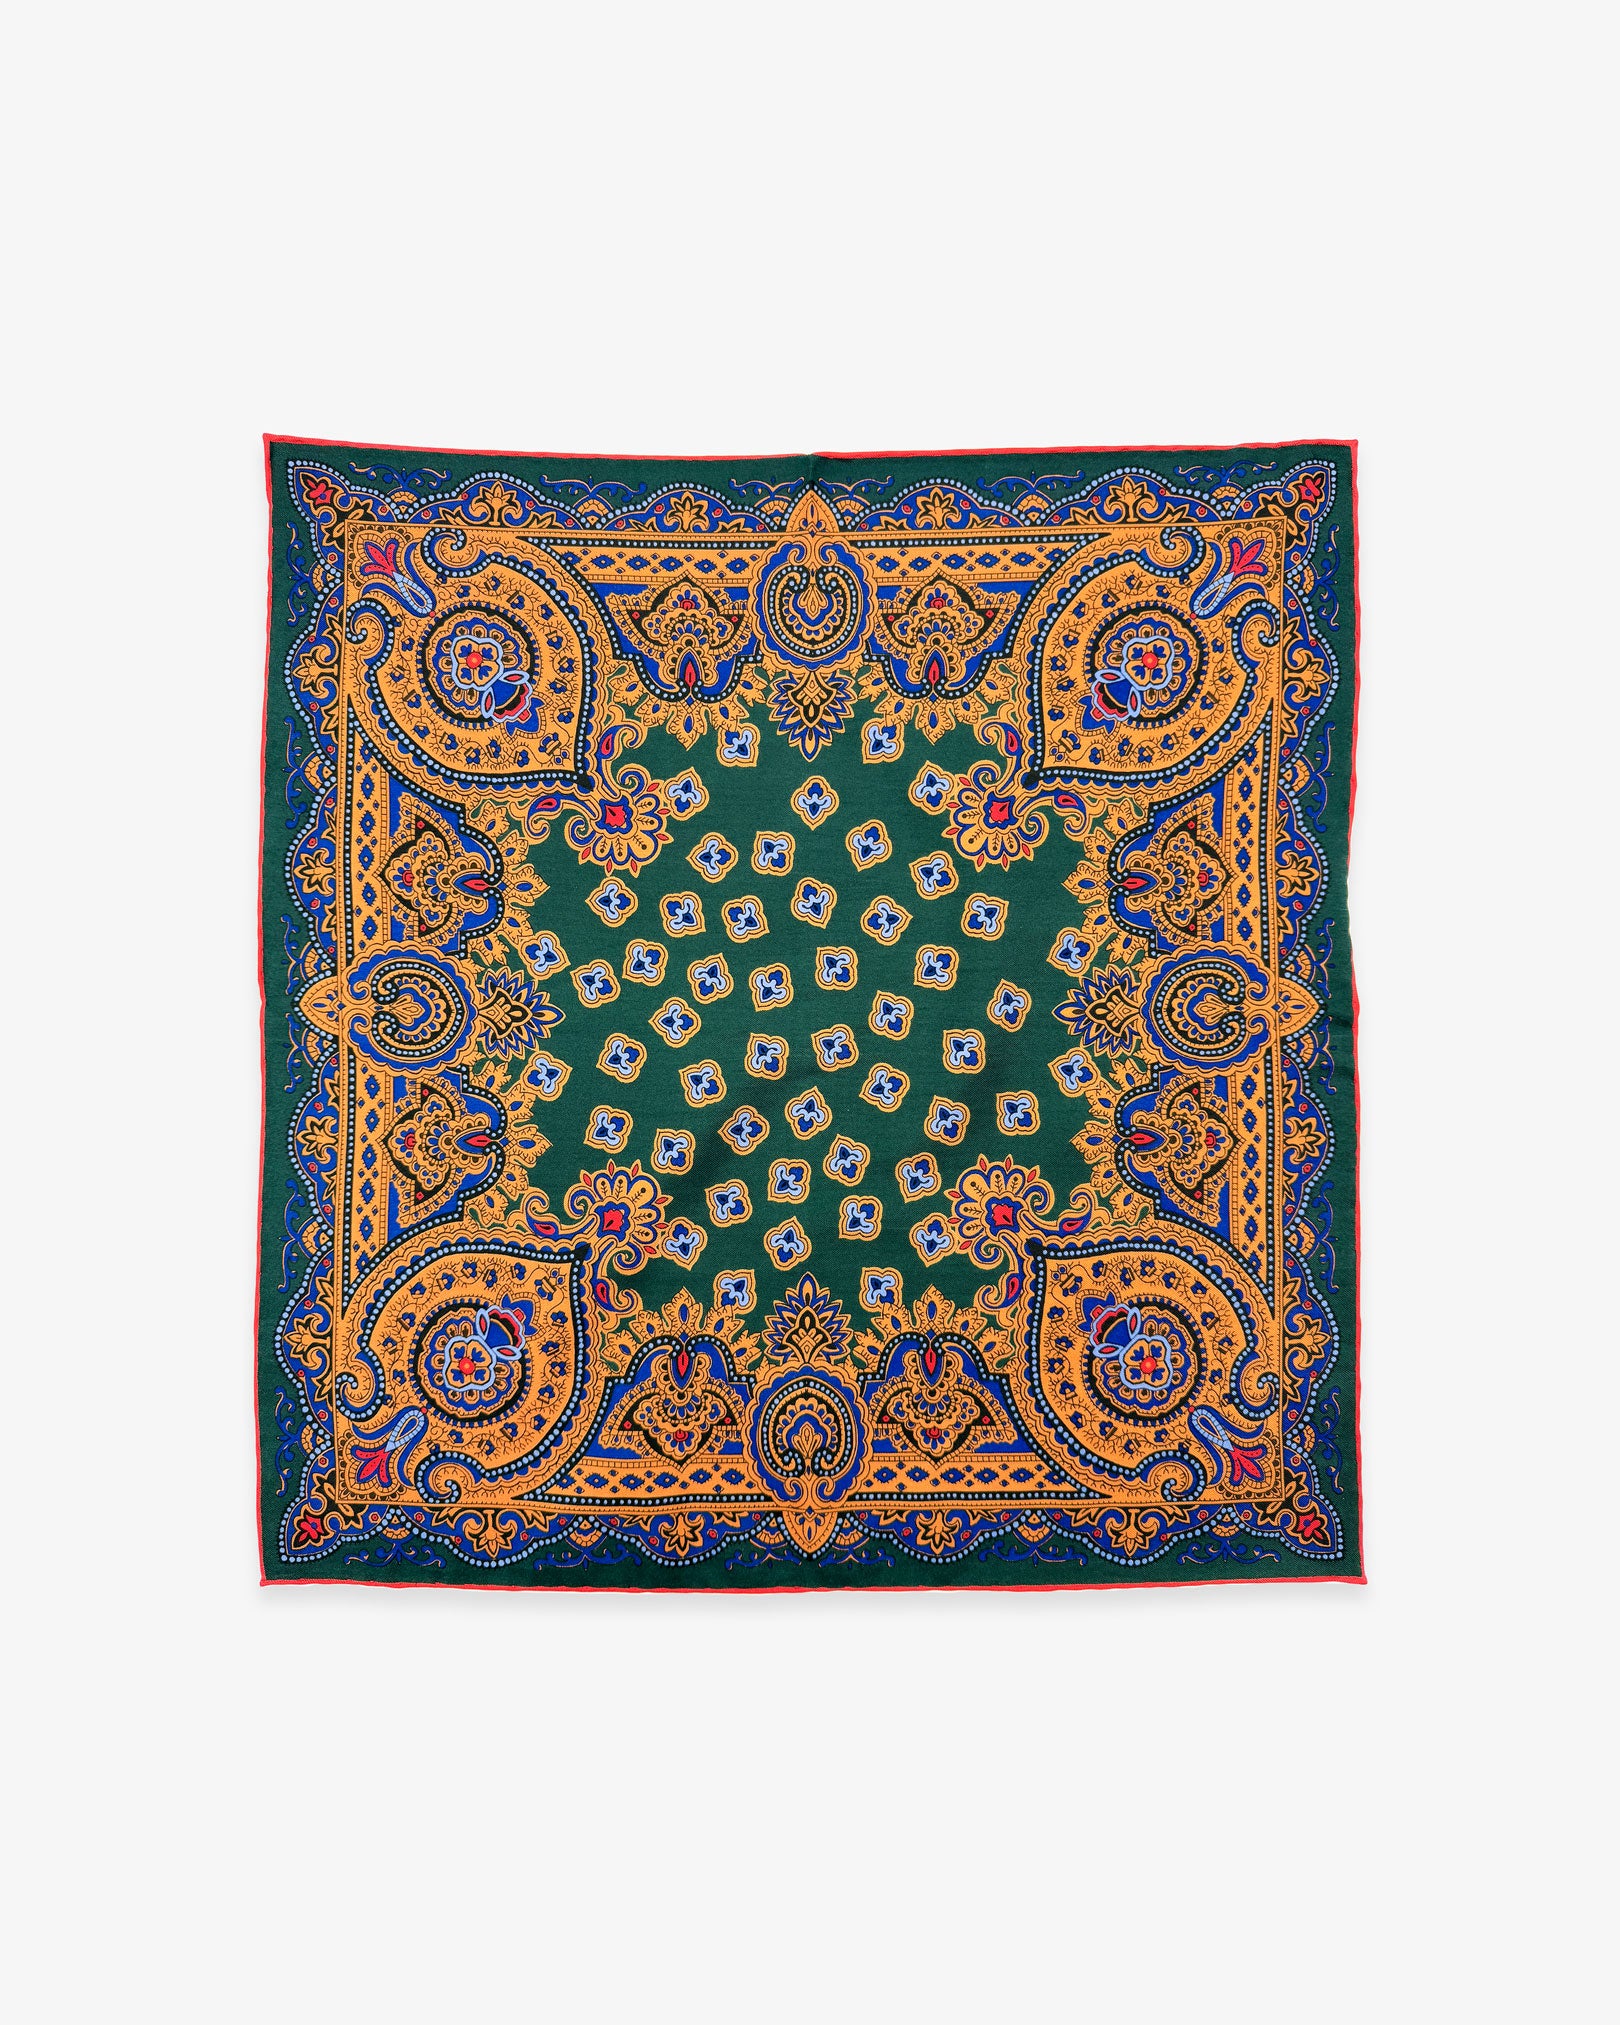 Fully unfolded 'Abingdon' English madder silk pocket square, showing the exquisitely ornate green, gold and blue design of the stylised paisley, fleur-de-lis and medallion decoration.